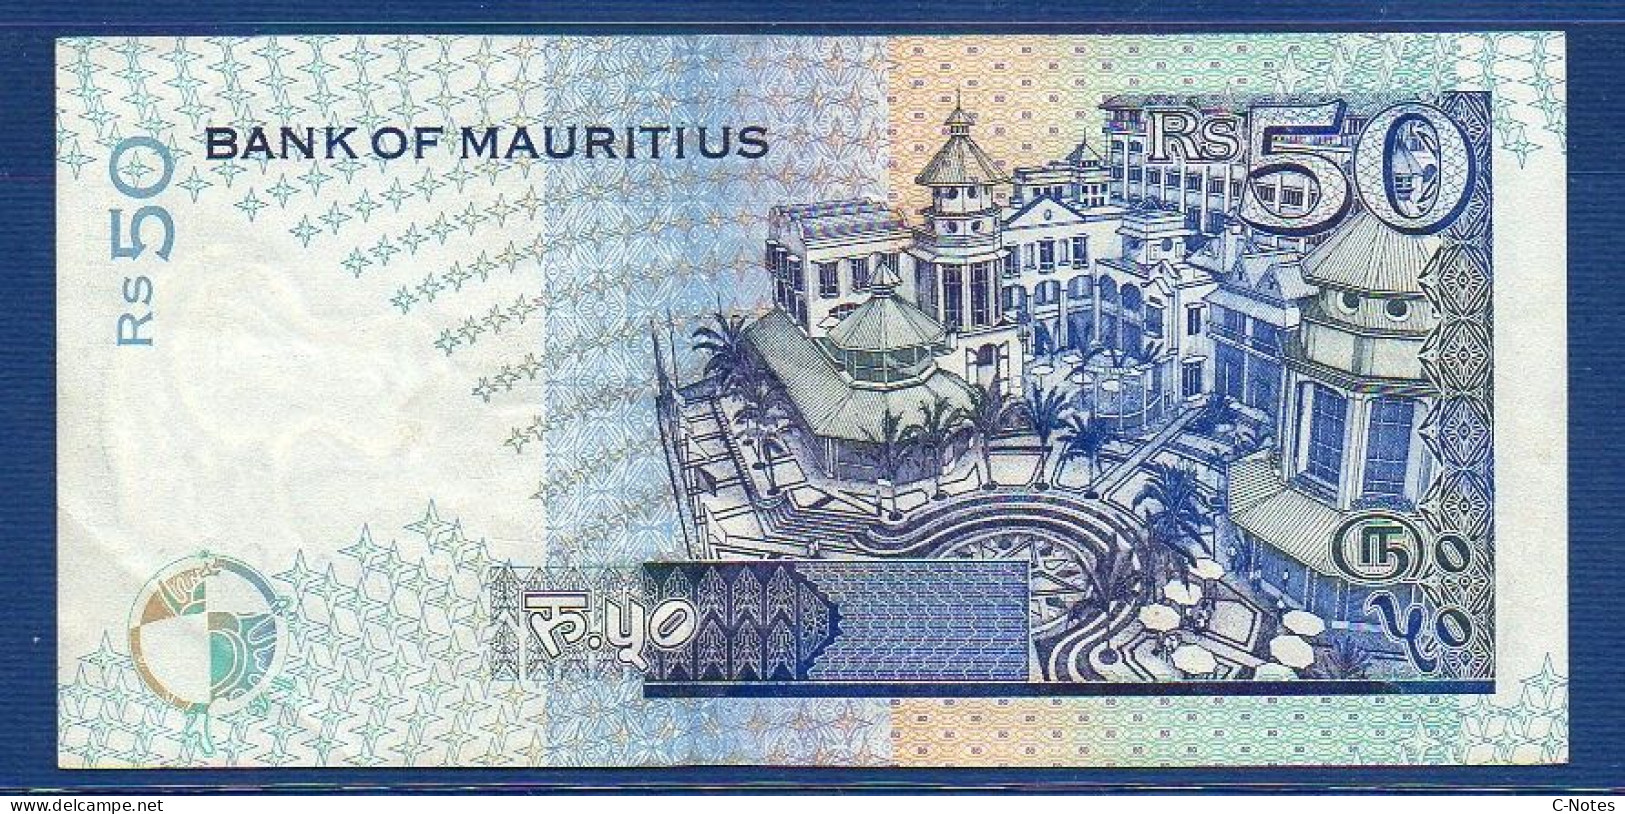 MAURITIUS - P.43 – 50 Rupees 1998 VF+, Serie BE857610 - Maurice